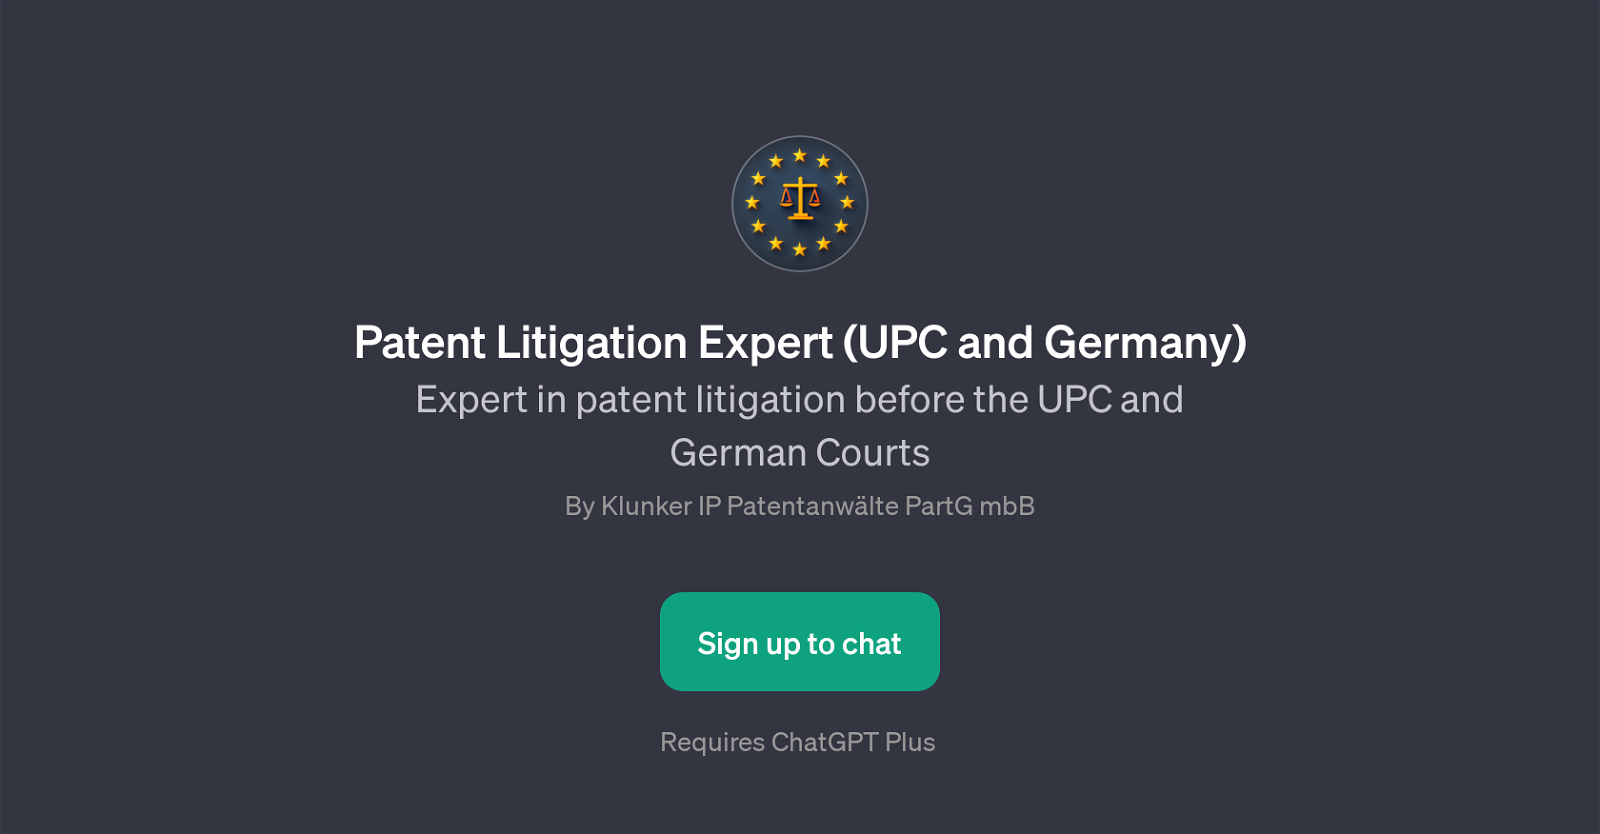 Patent Litigation Expert (UPC and Germany) website